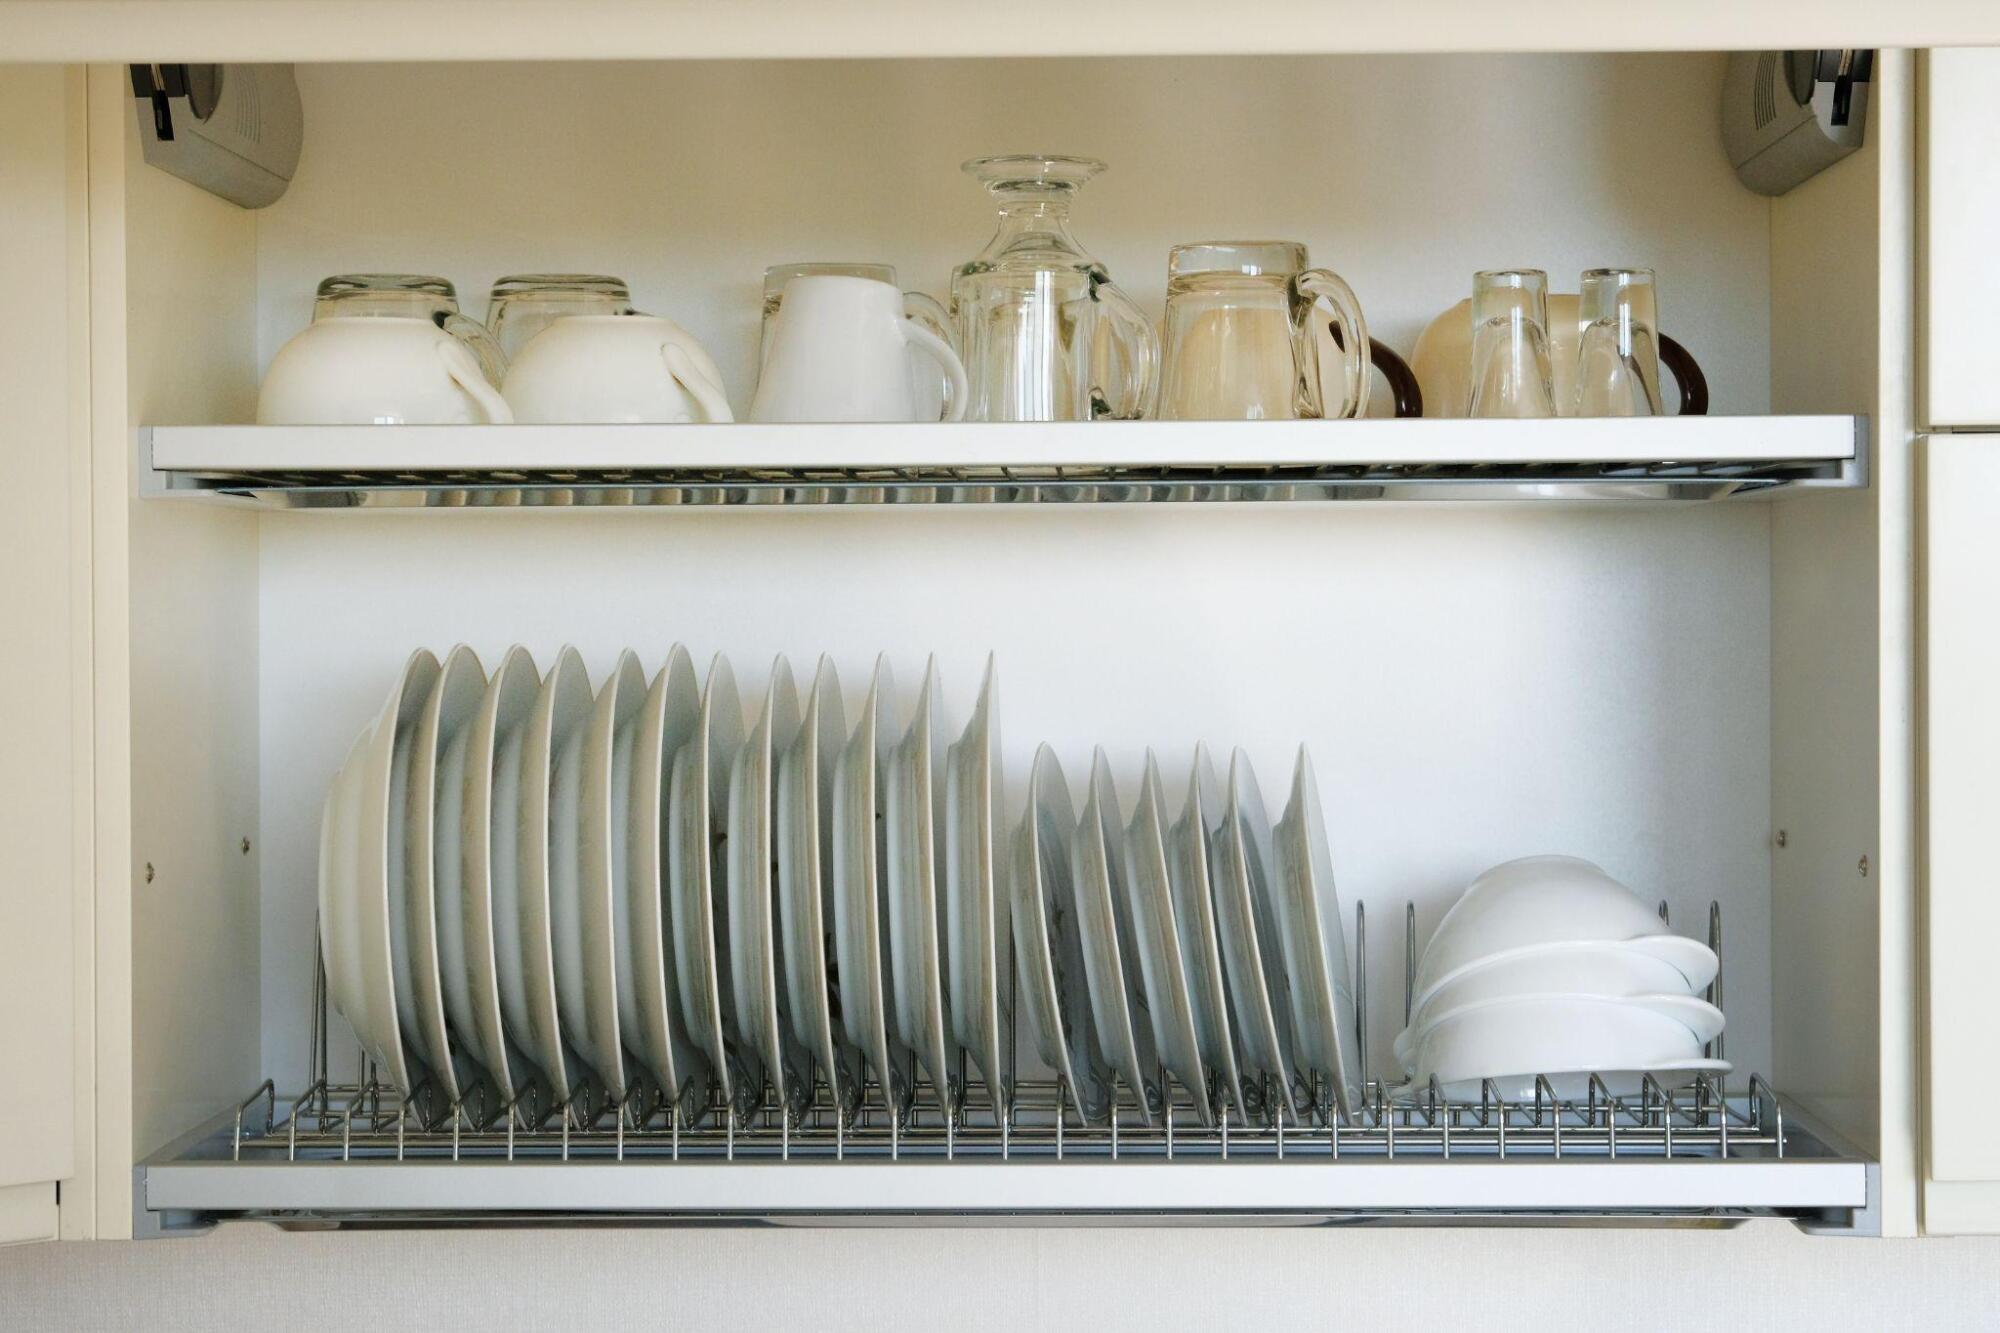 An organizational kitchen cabinet with a rack of dishes.